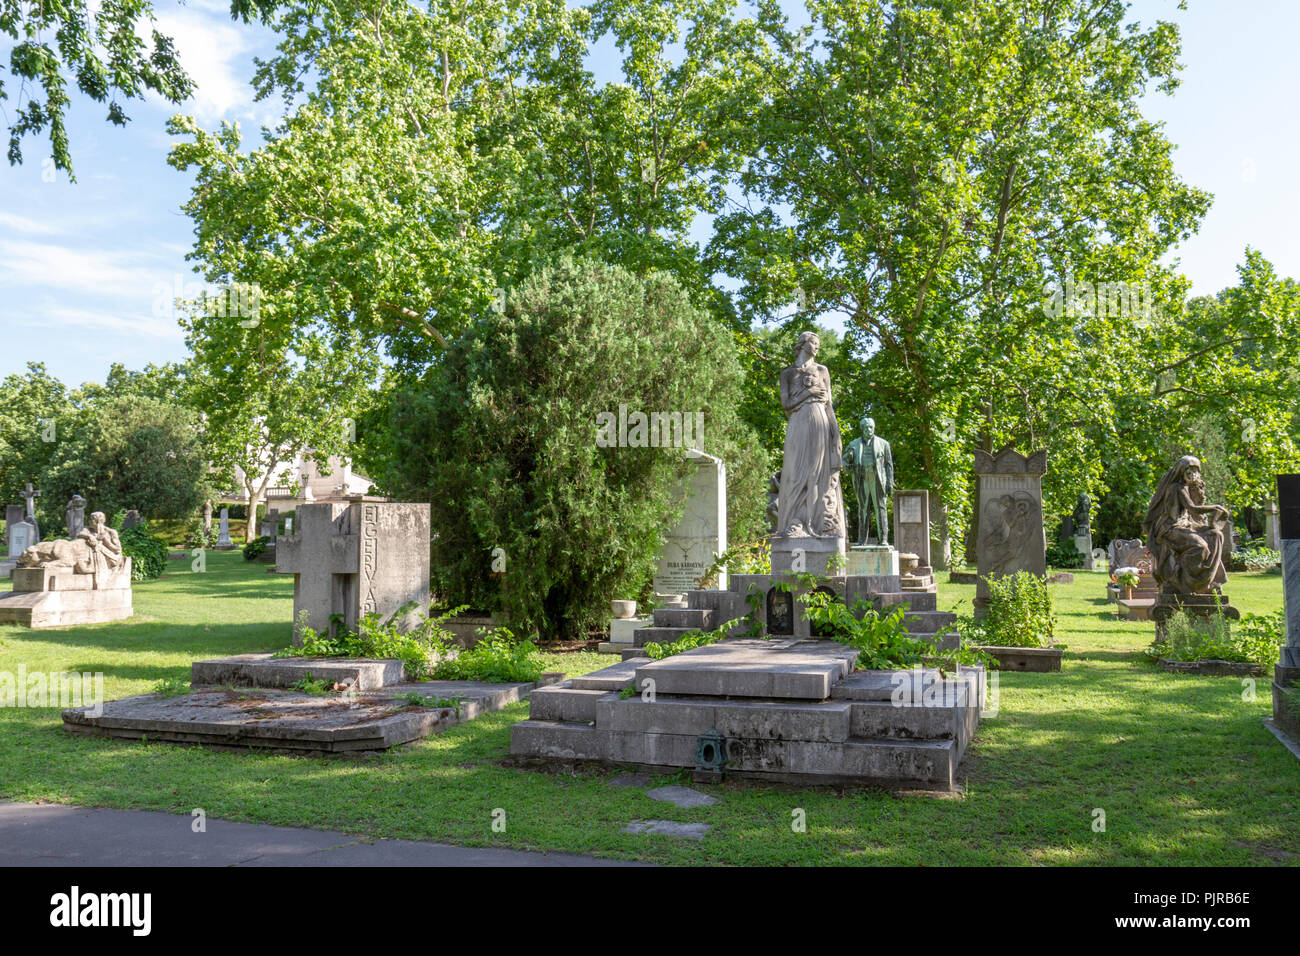 General view of graves and headstones in the Kerepesi Cemetery (Fiume Road National Graveyard), Budapest, Hungary. Stock Photo